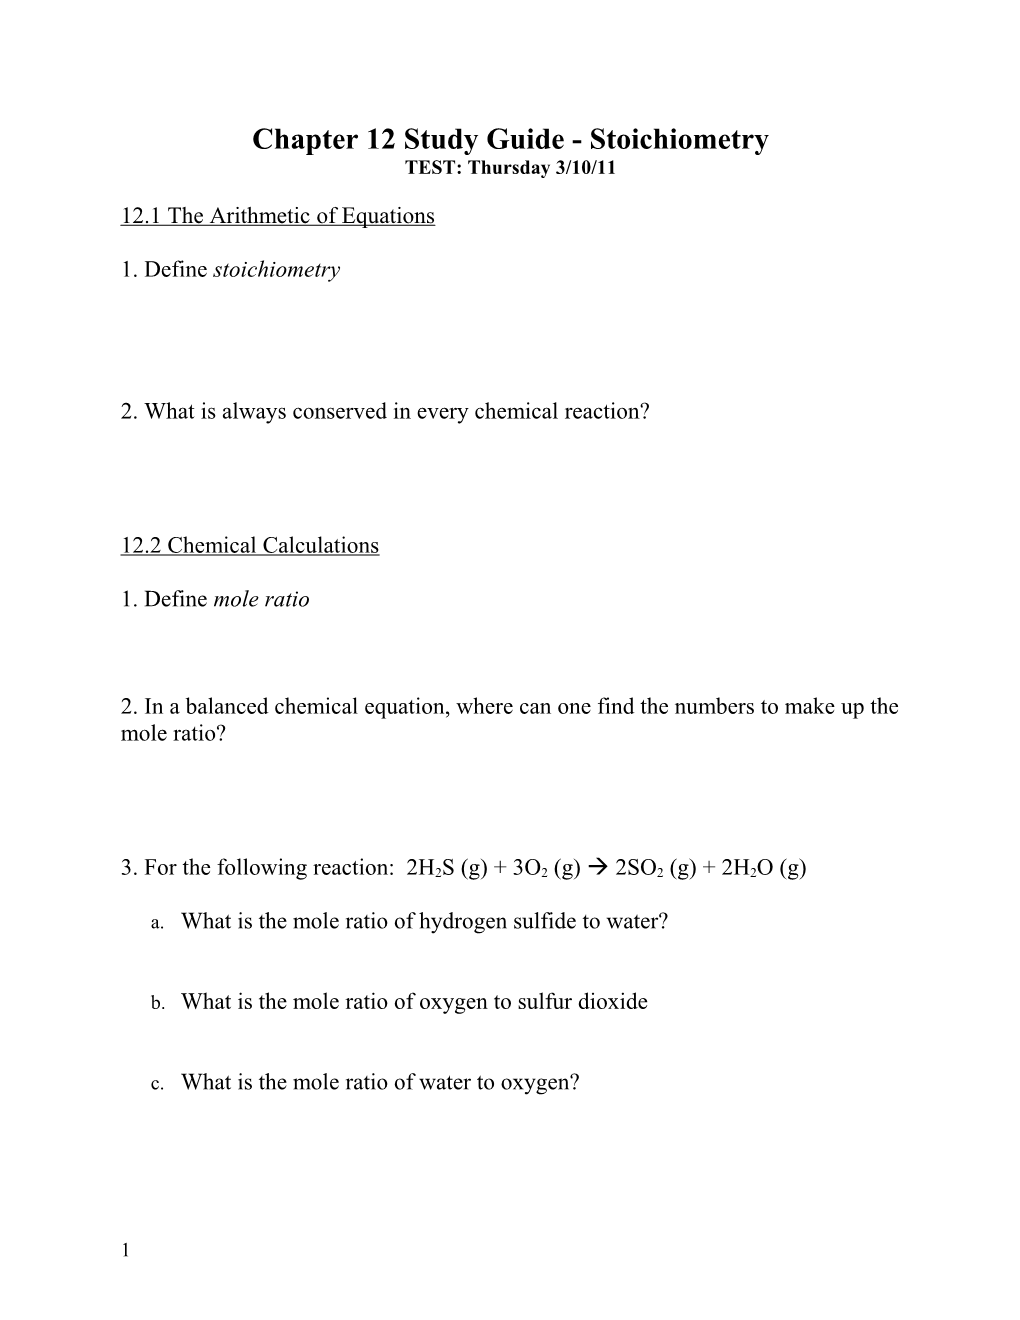 Chapter 12Study Guide- Stoichiometry